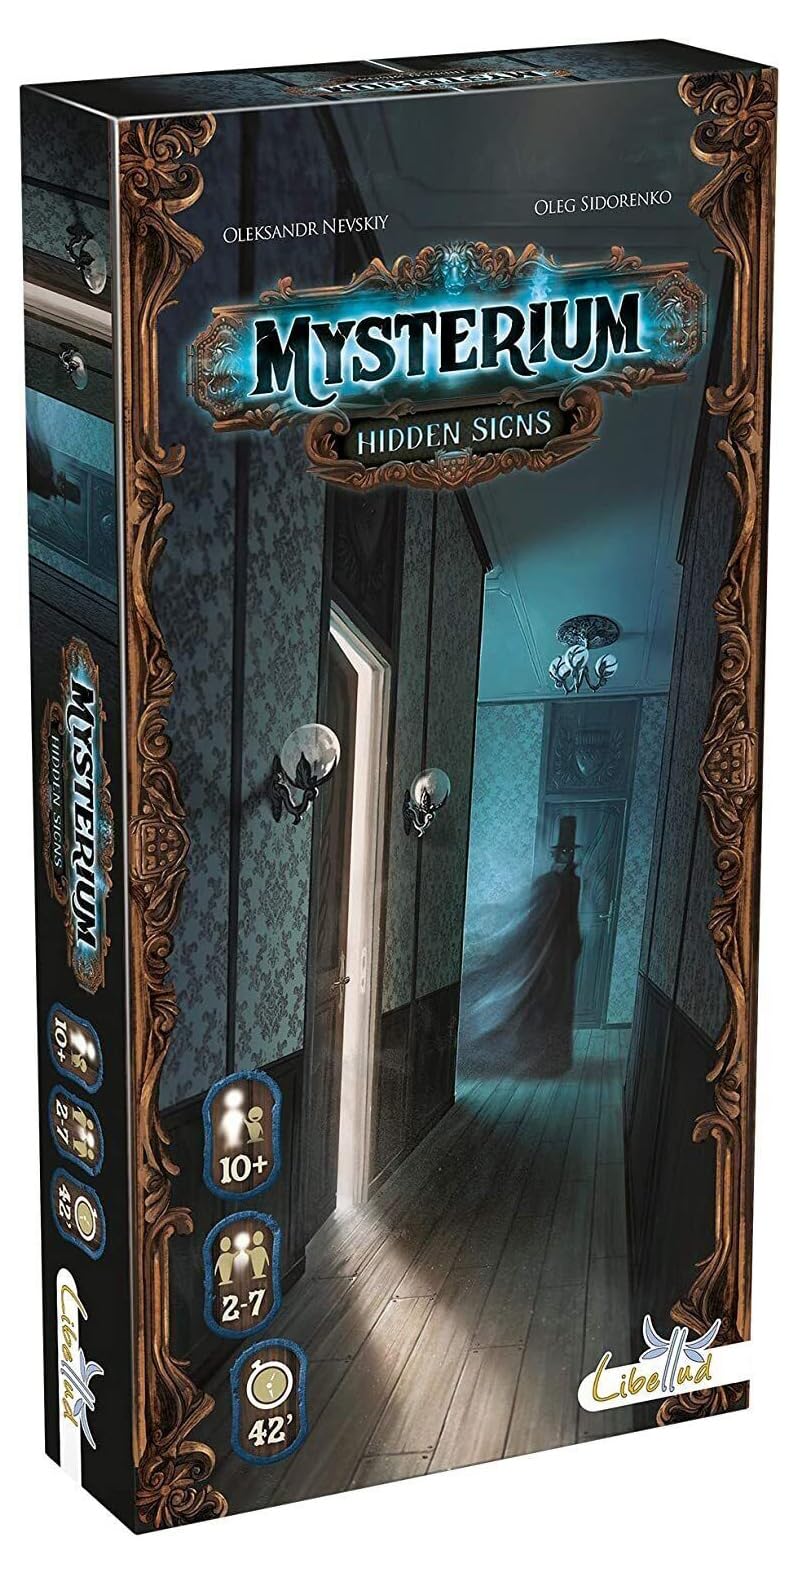 Libellud, Mysterium Hidden Signs Board Game Expansion, Ages 10 and up, 2-7 Players, Average Playtime 42 Minutes